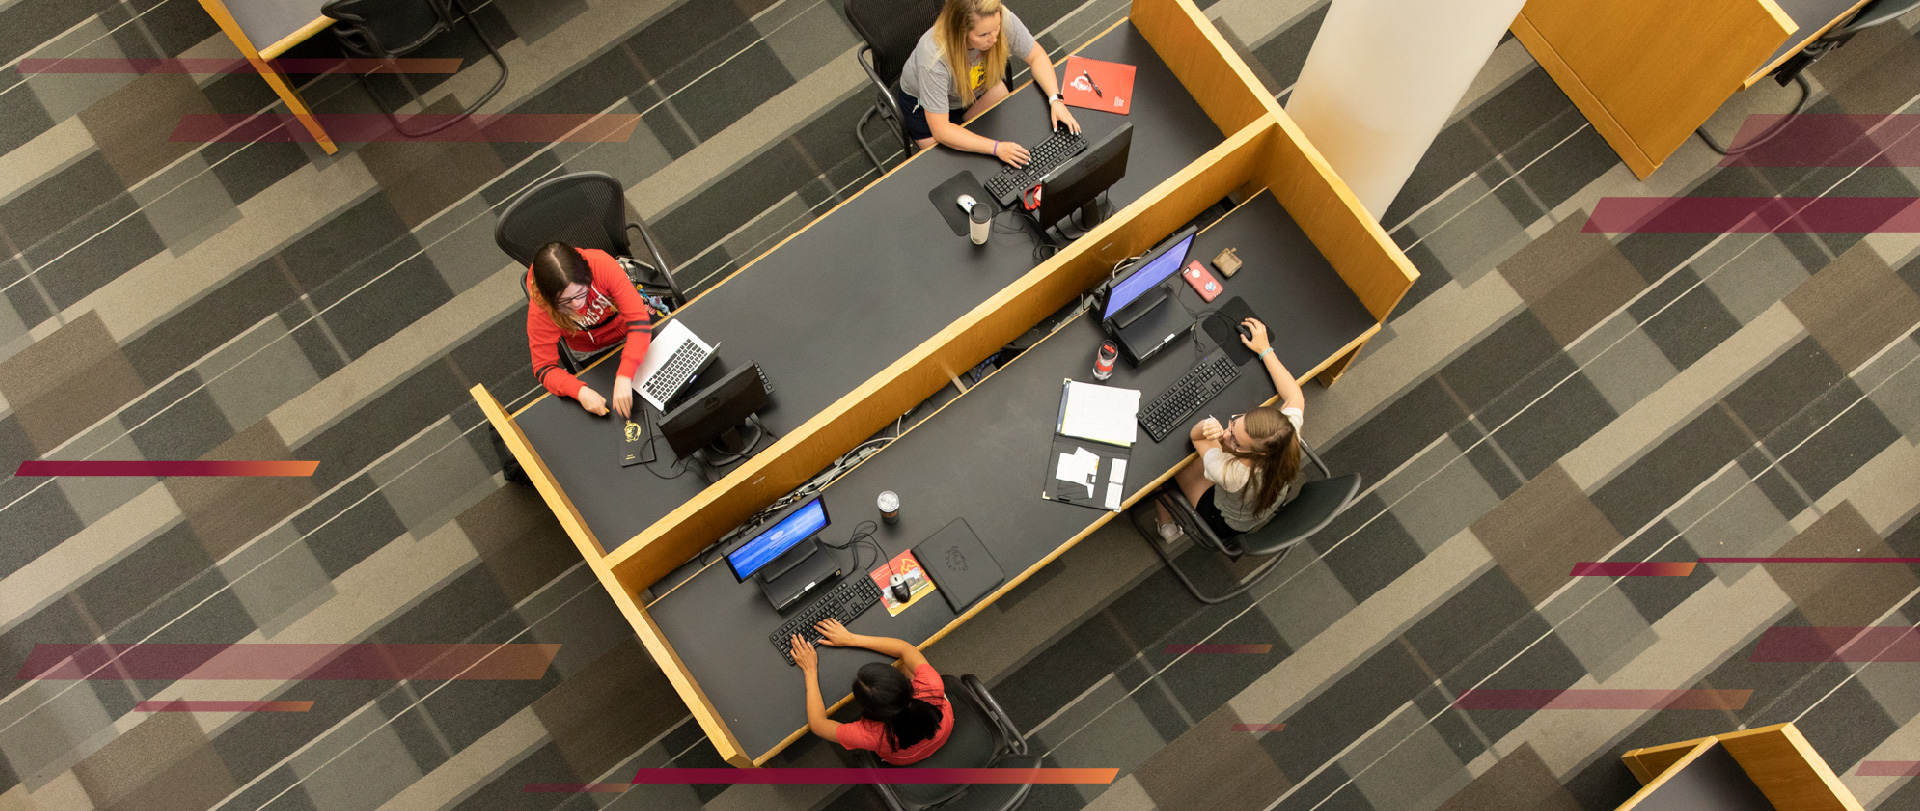 Students in the FLITE library